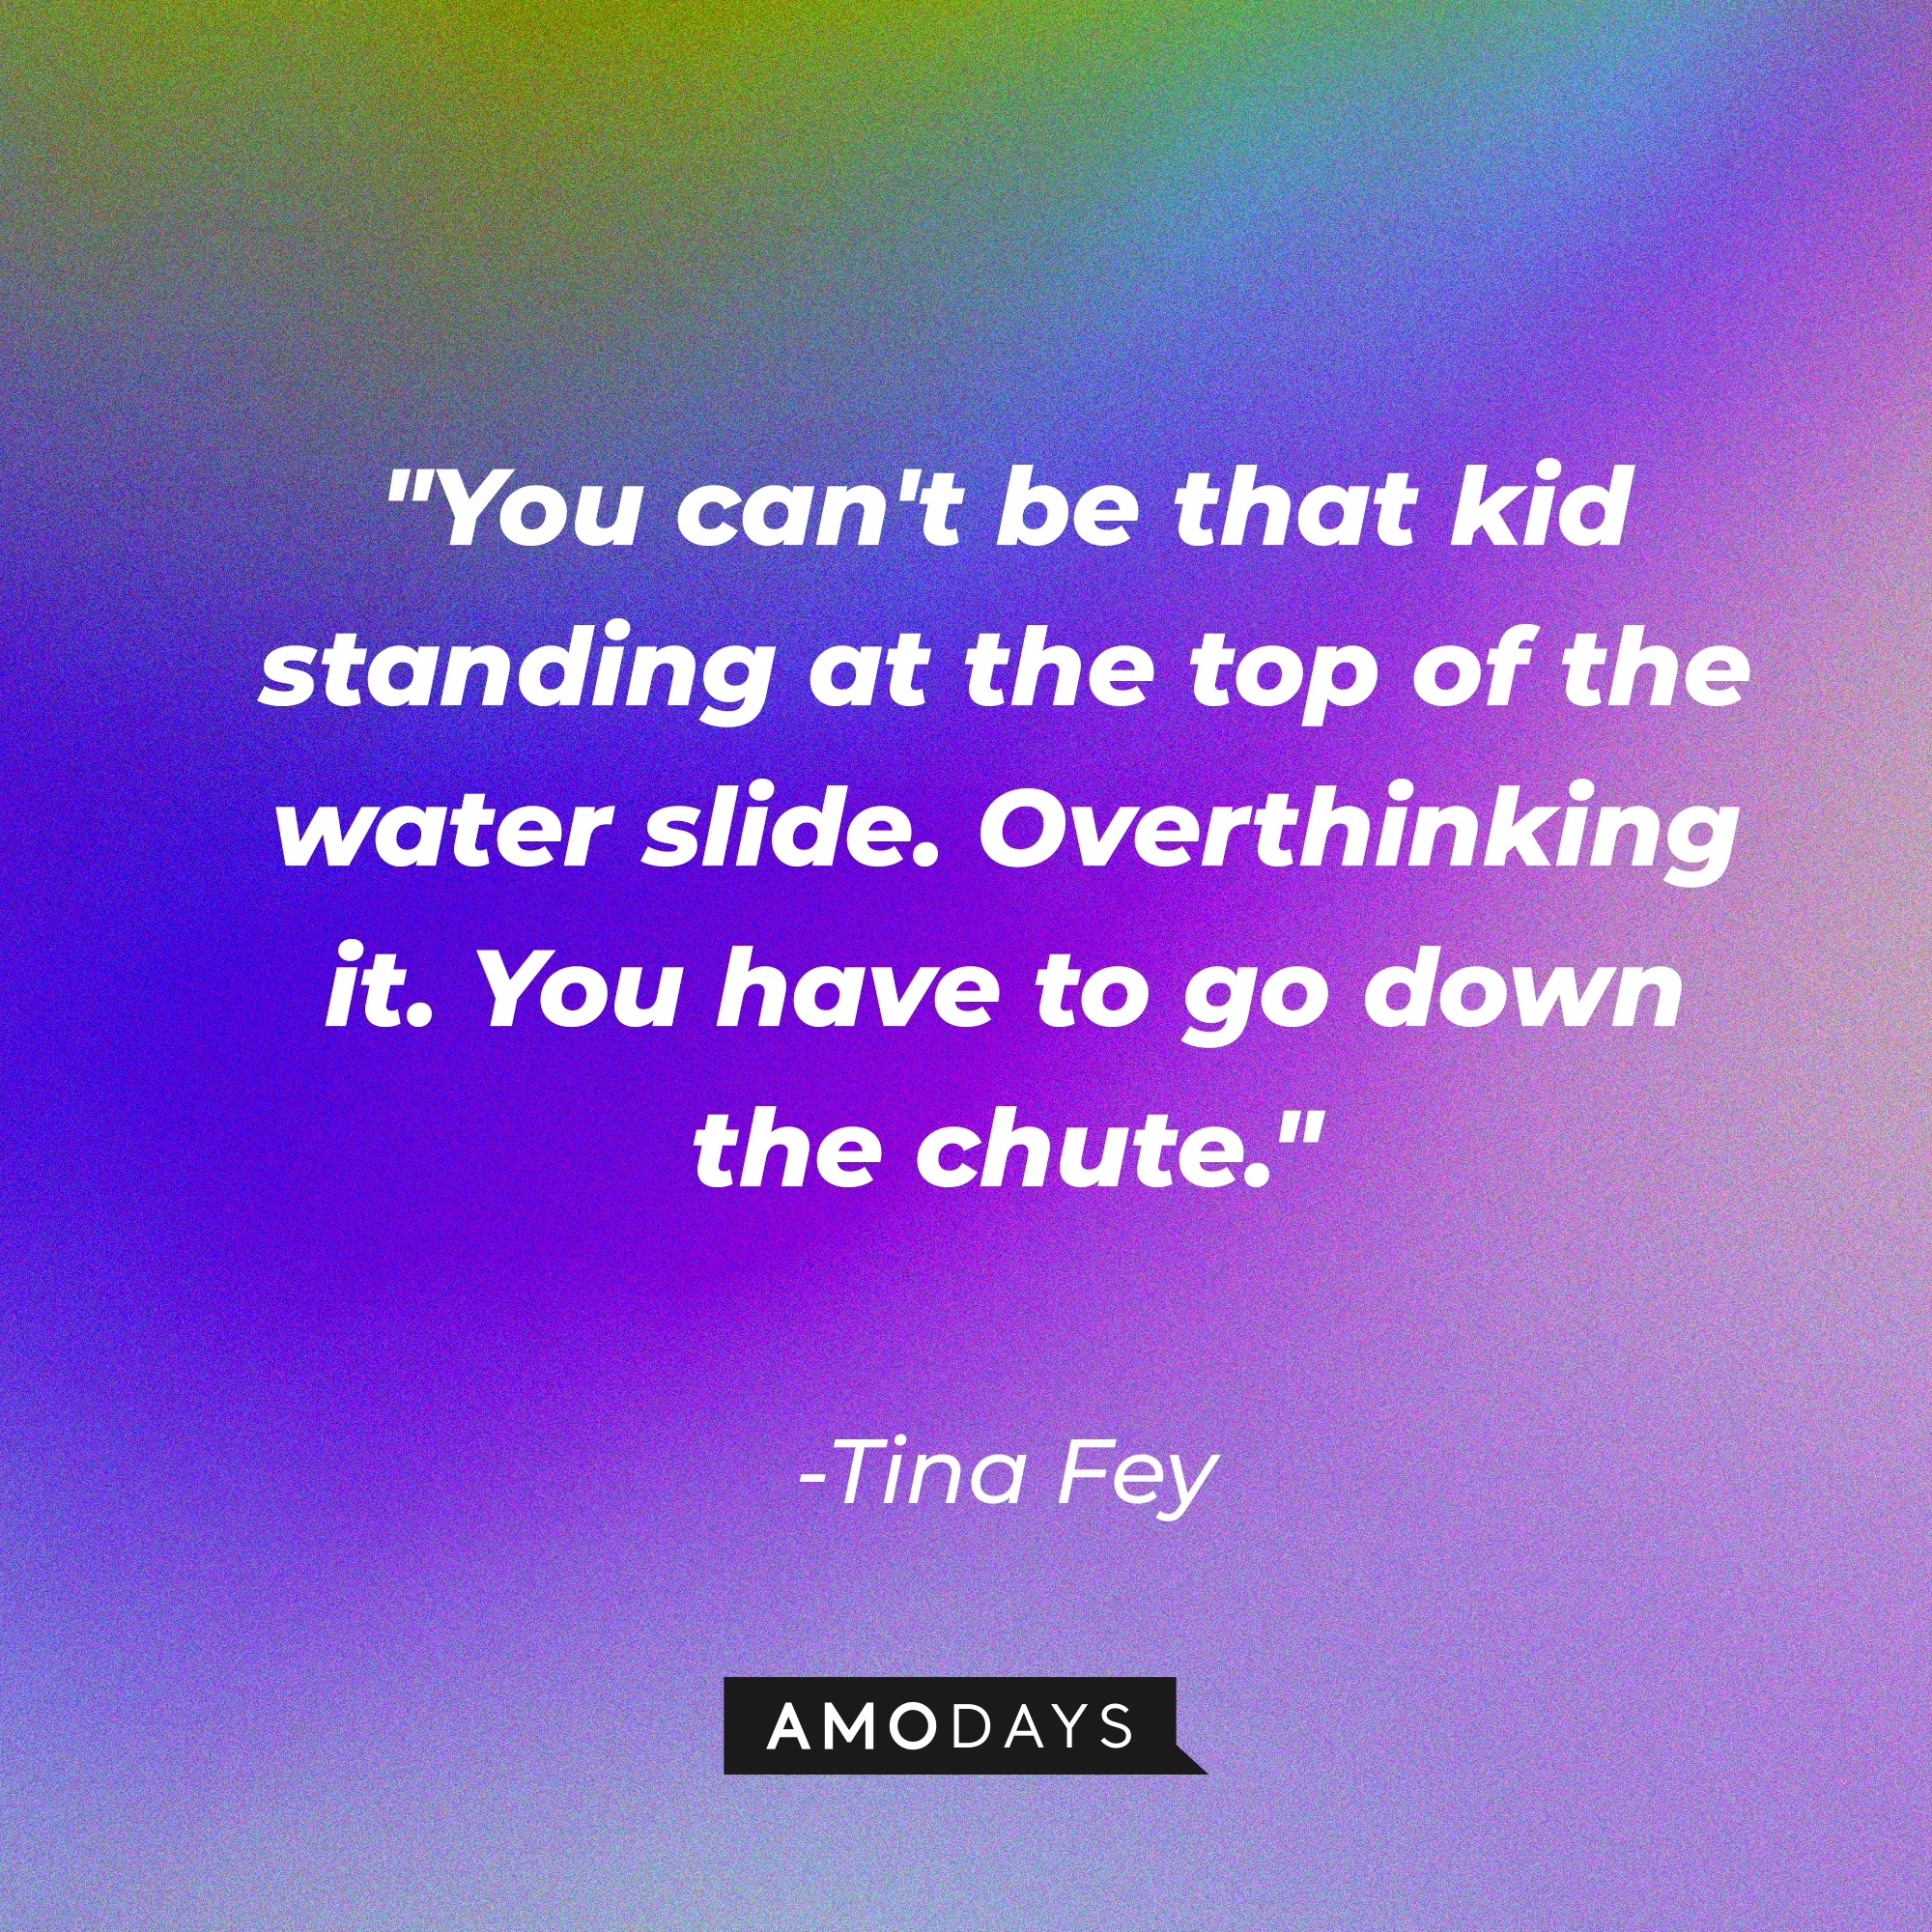 Tina Fey's quote: "You can't be that kid standing at the top of the water slide. Overthinking it. You have to go down the chute." | Source: AmoDays